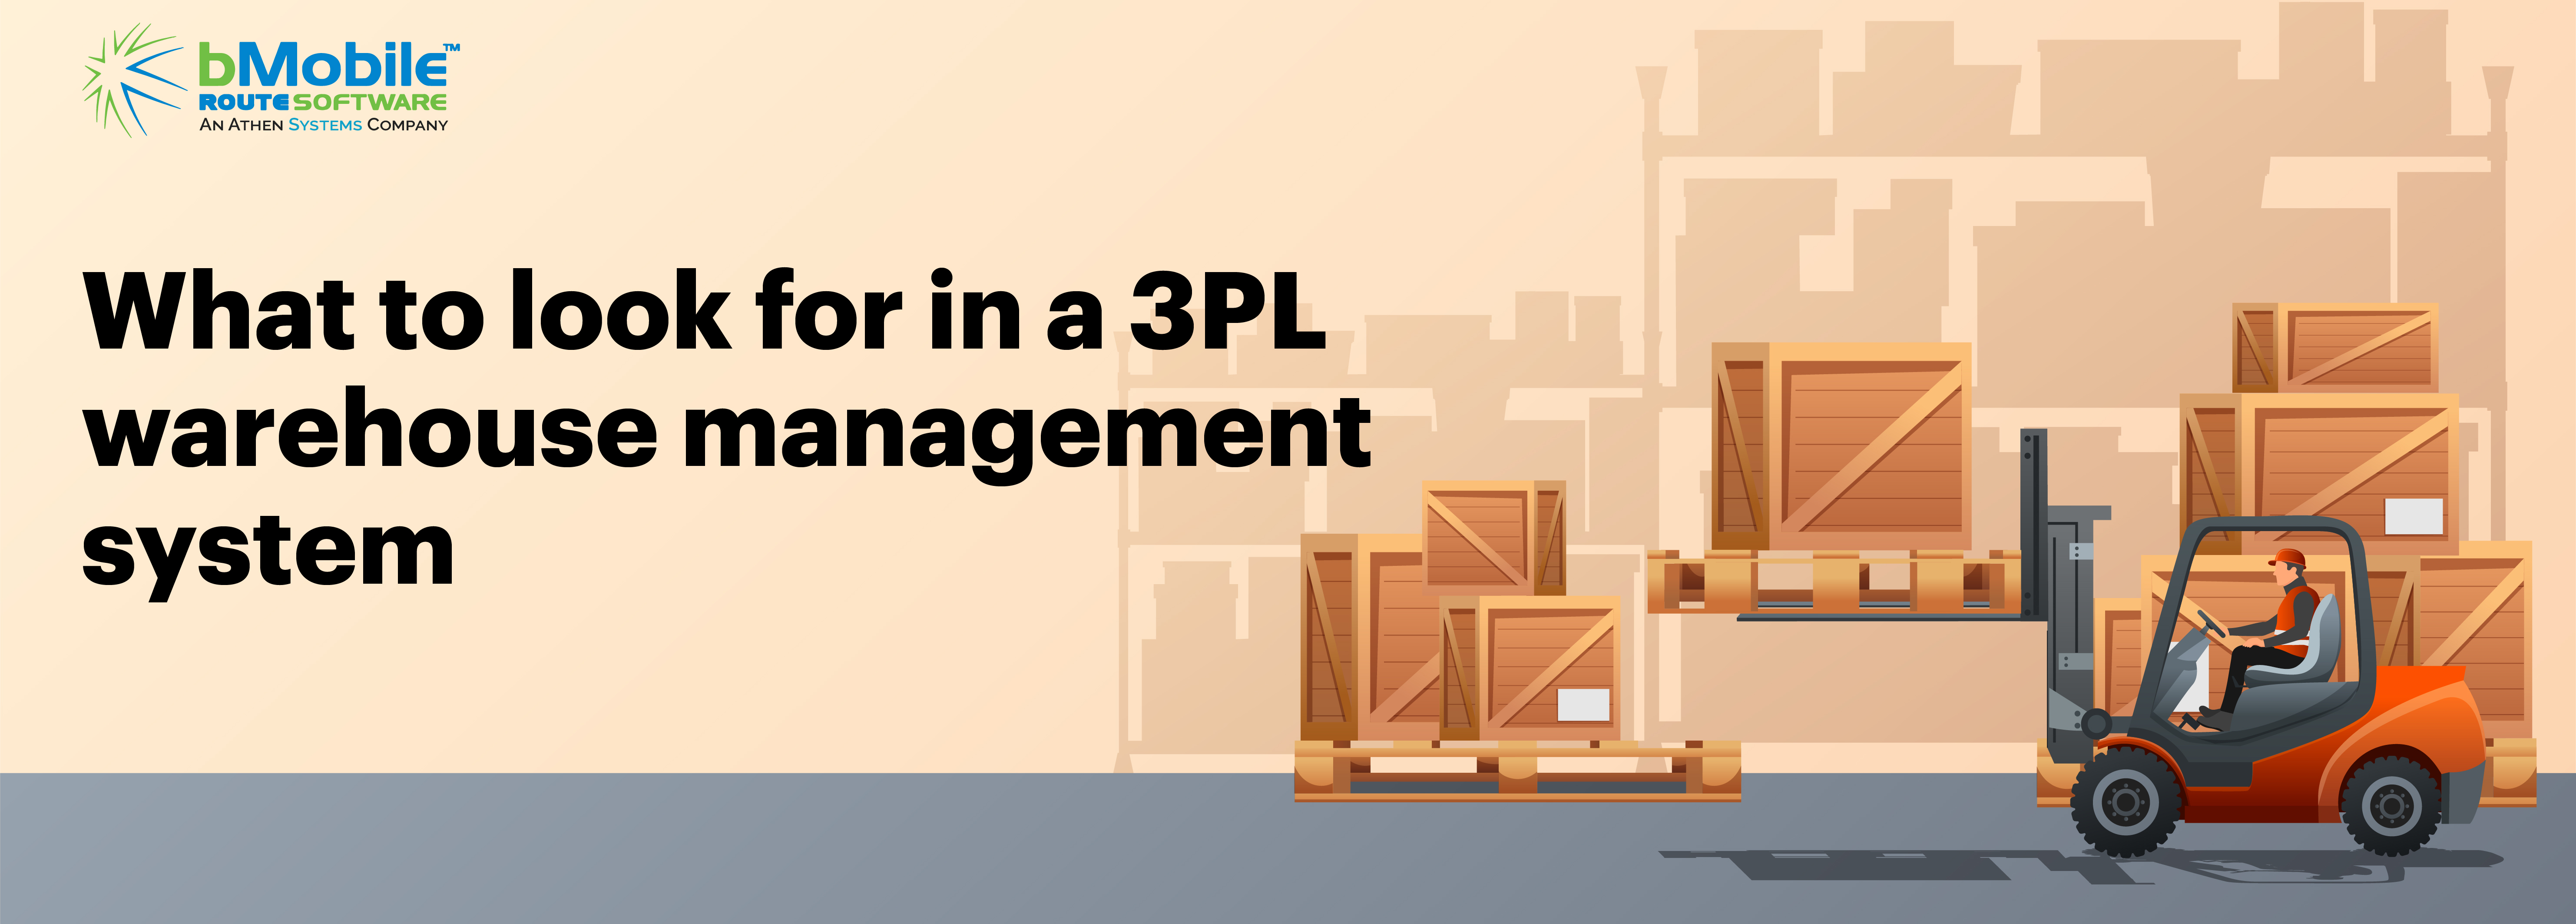 What-to-look-for-in-a-3PL-warehouse-management-system